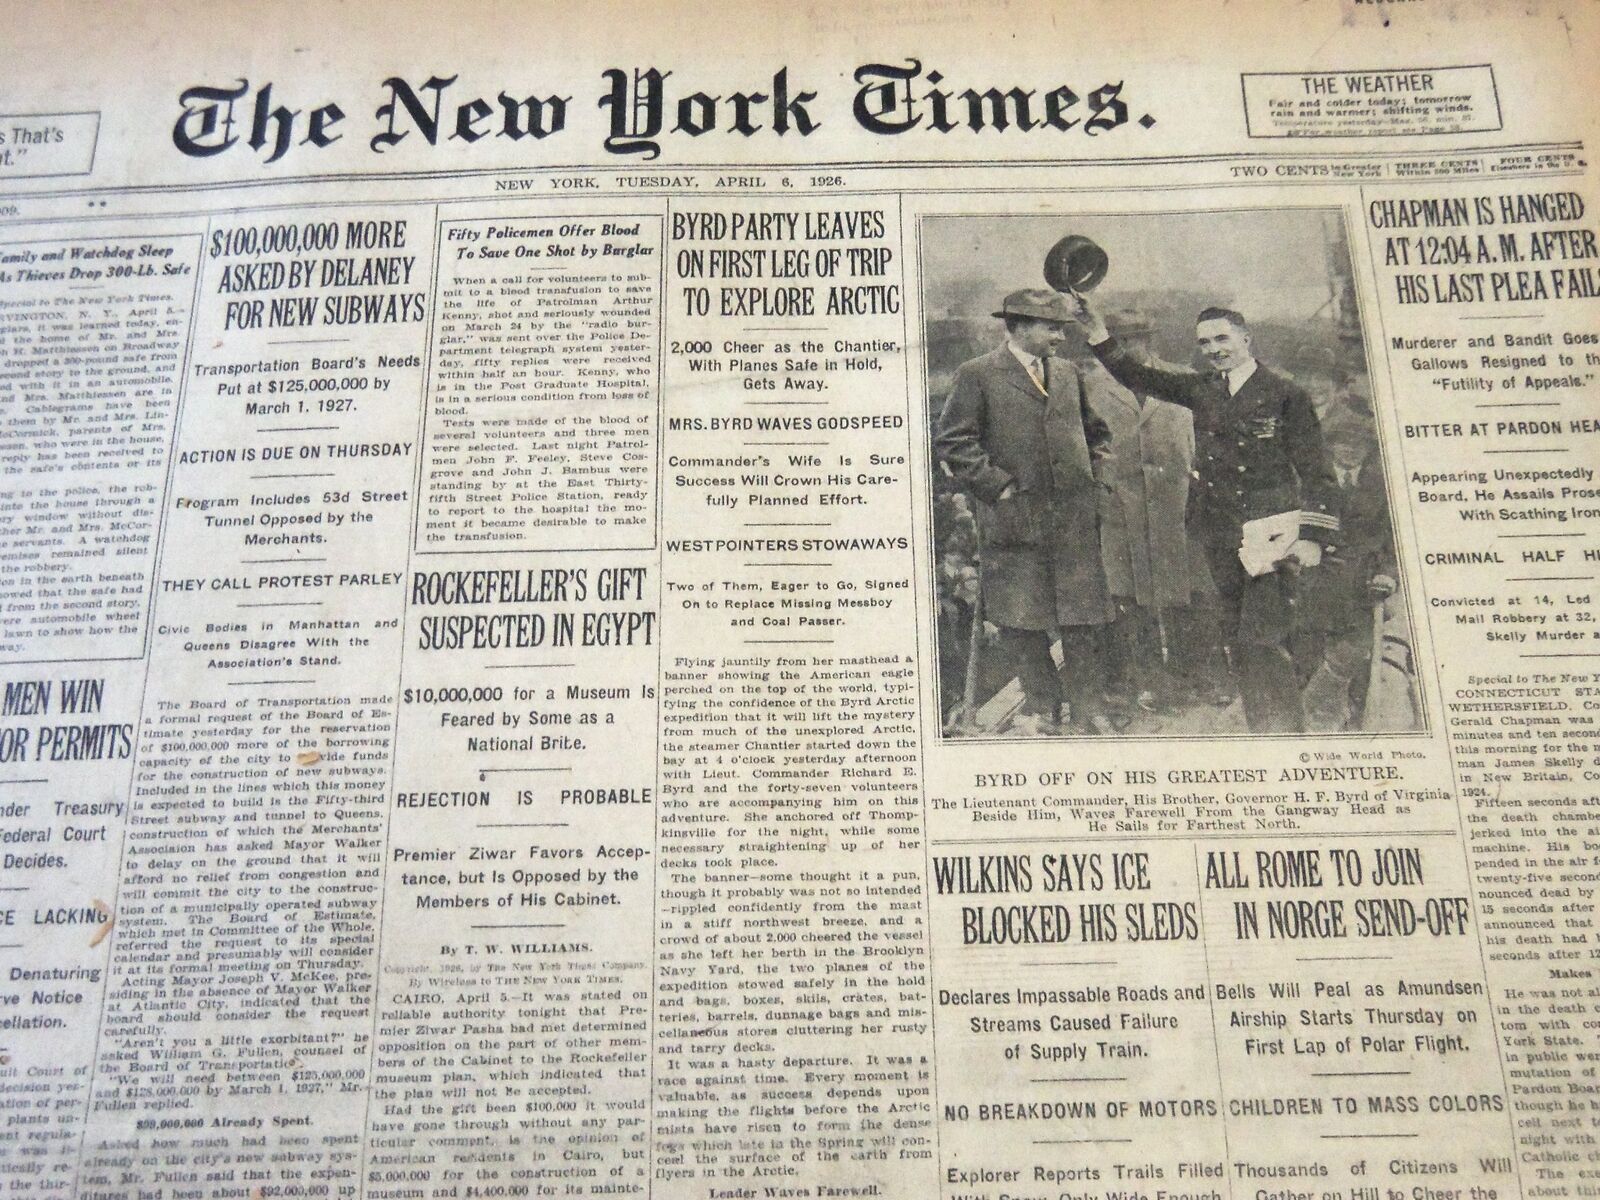 1926 APRIL 6 NEW YORK TIMES - BYRD PARTY LEAVES TO EXPLORE ARCTIC - NT 5685